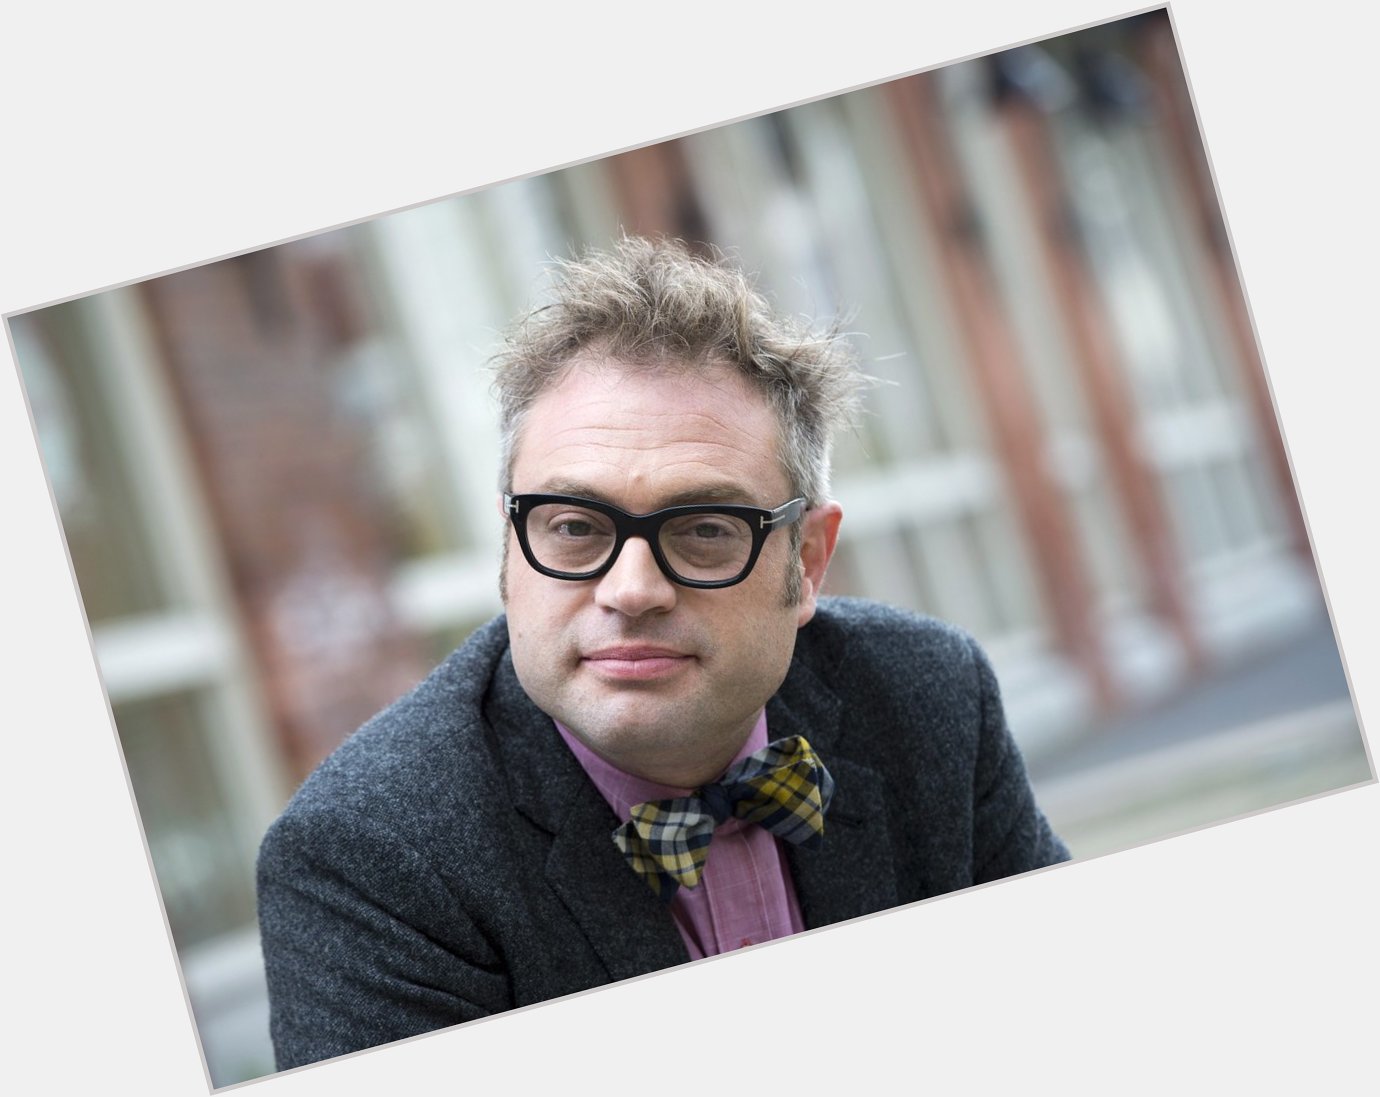 Happy birthday to Steven Page!  